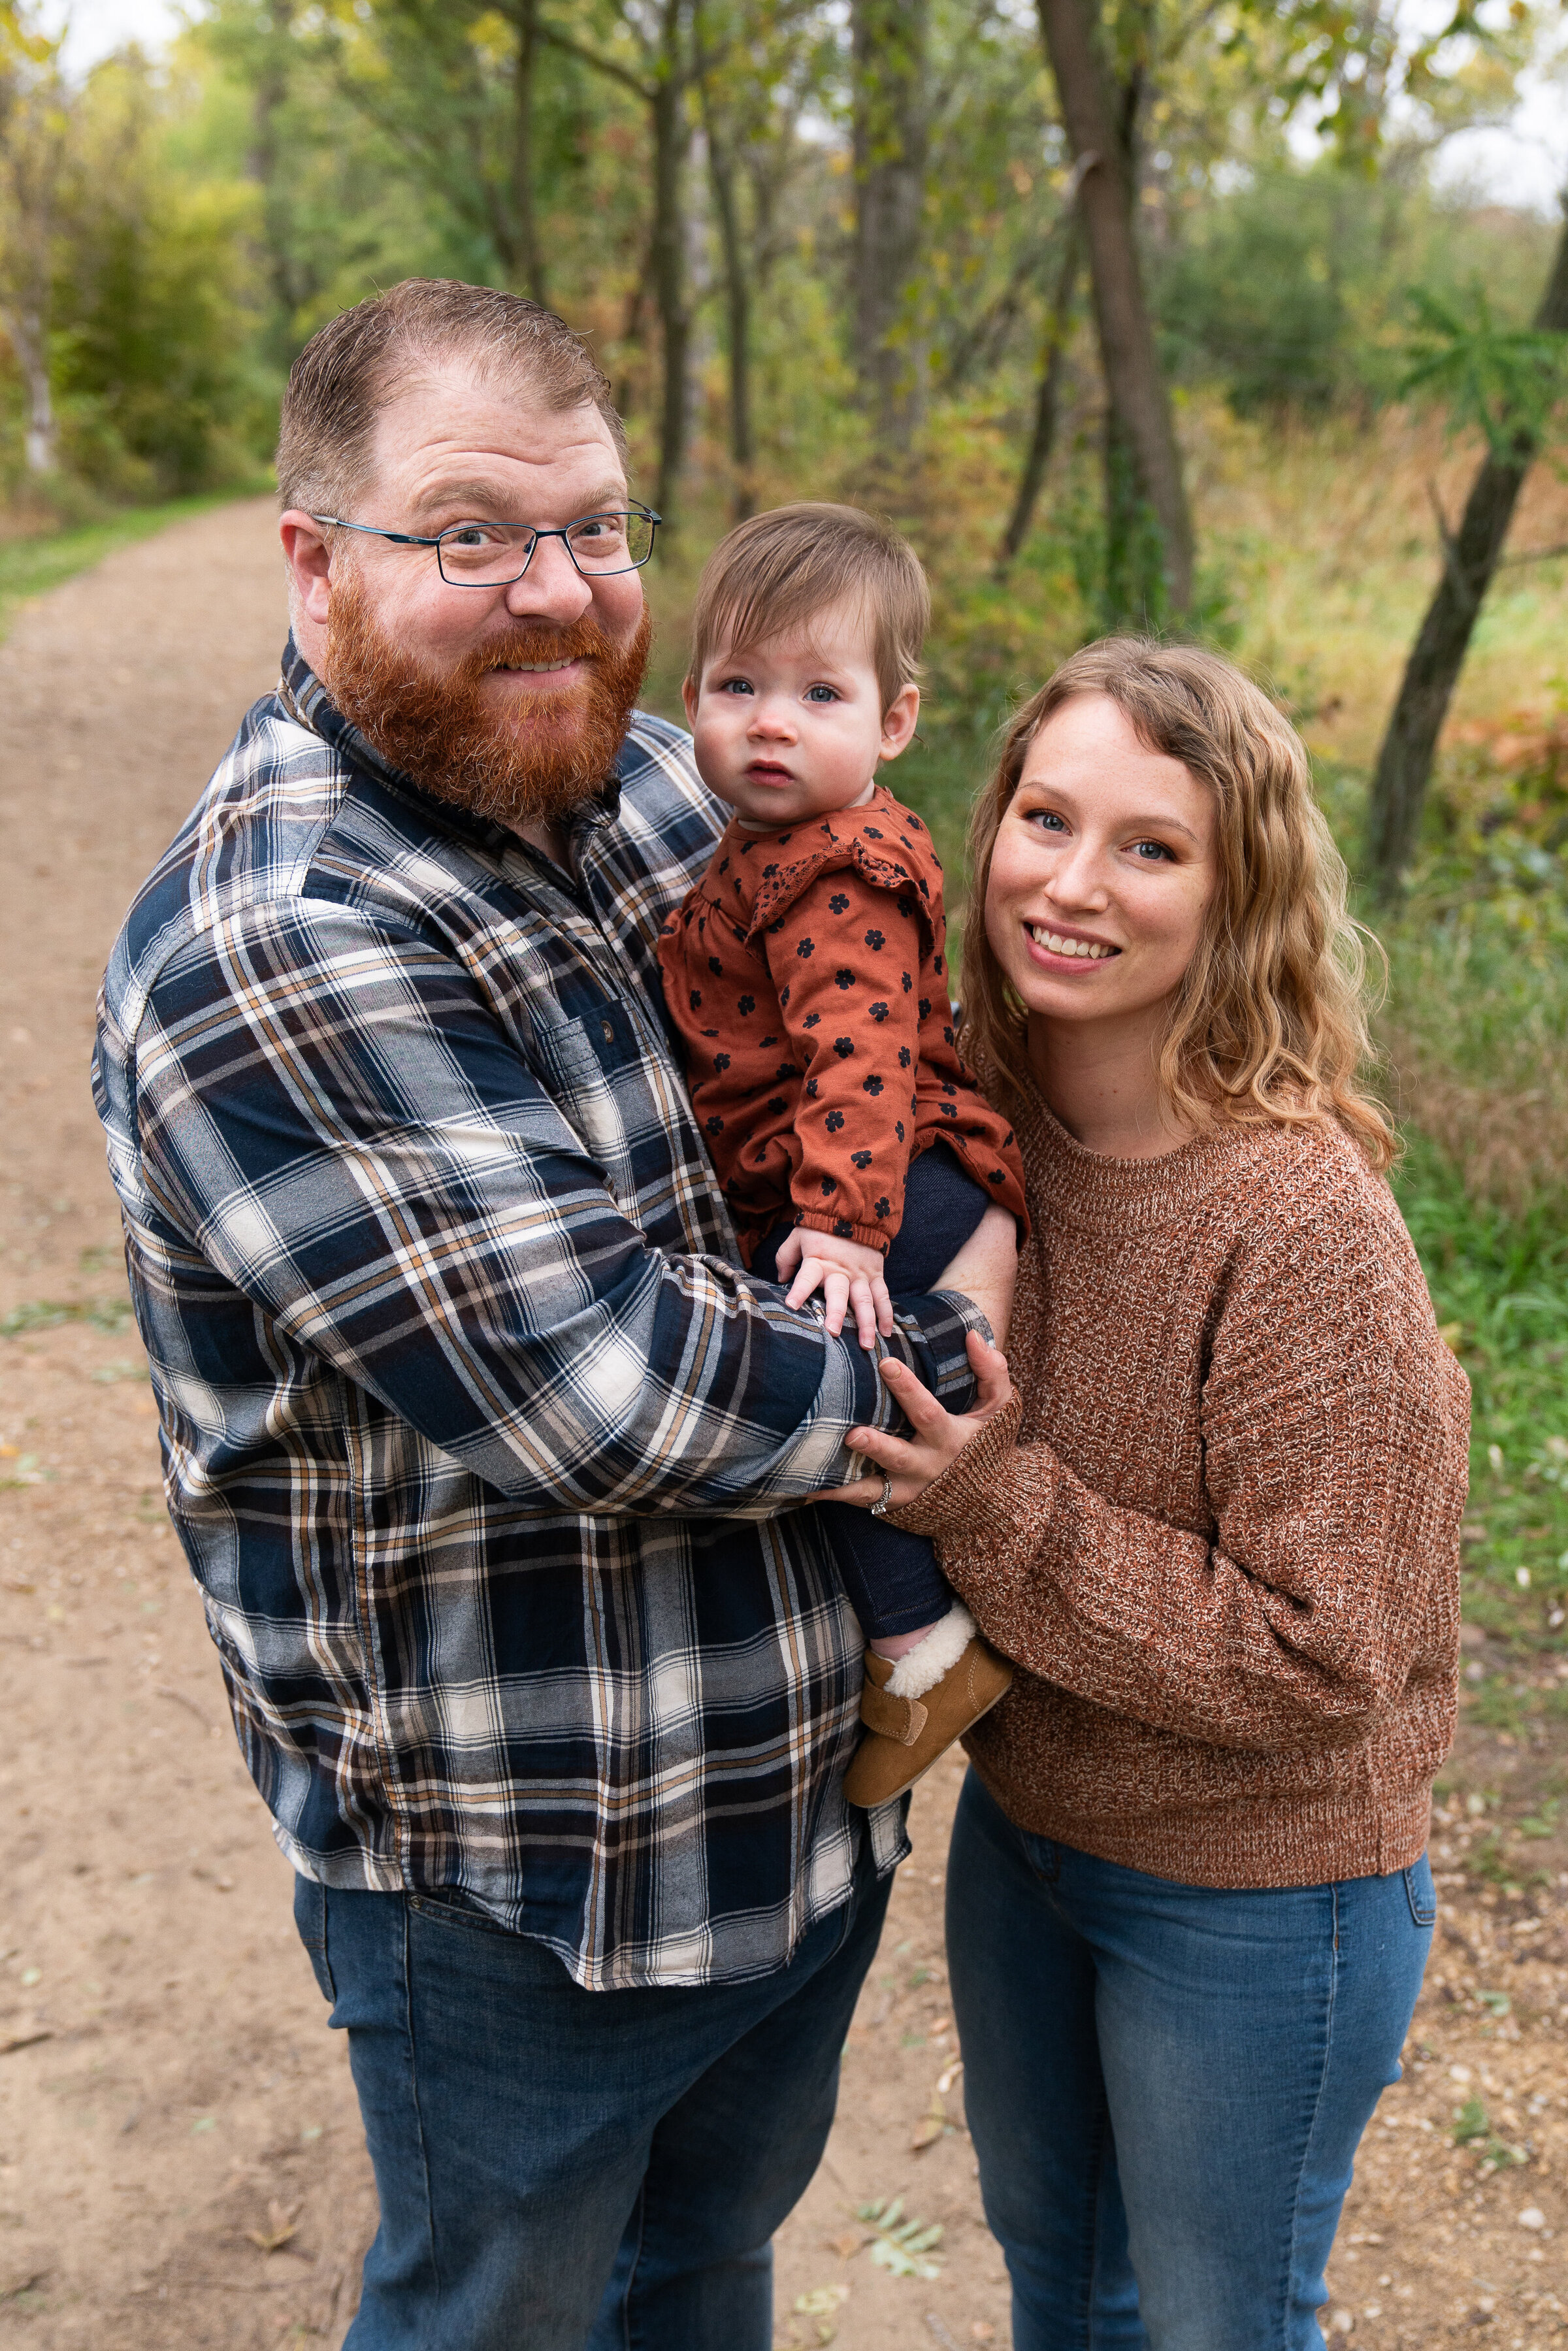 Family of three stand together and smile at the camera during their fall family photo shoot.